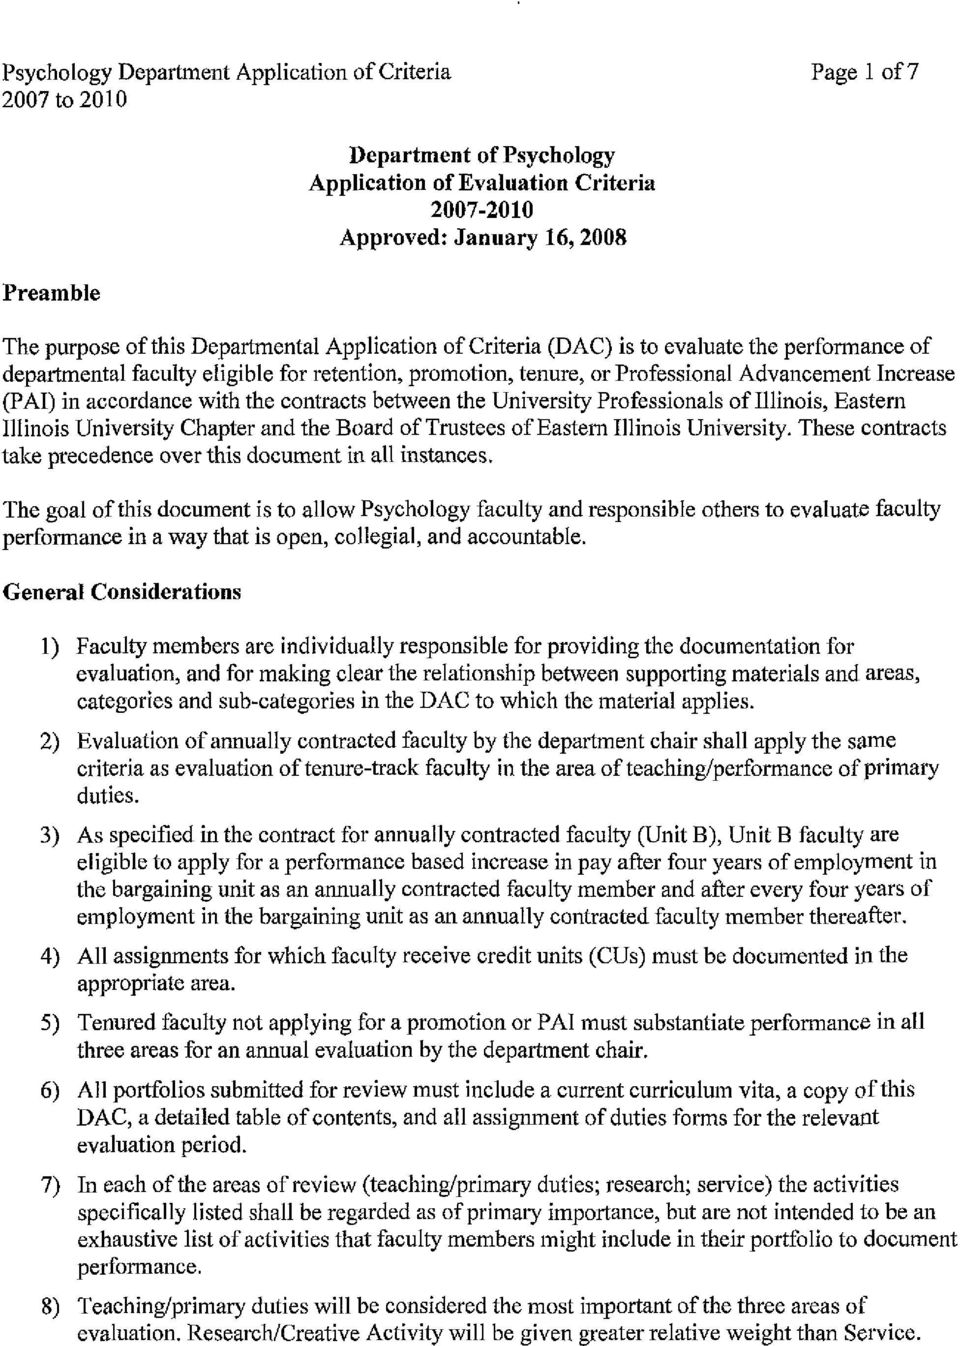 Illinois, Eastern Illinois University Chapter and the Board of Trustees of Eastern Illinois University. These contracts take precedence over this document in all instances.